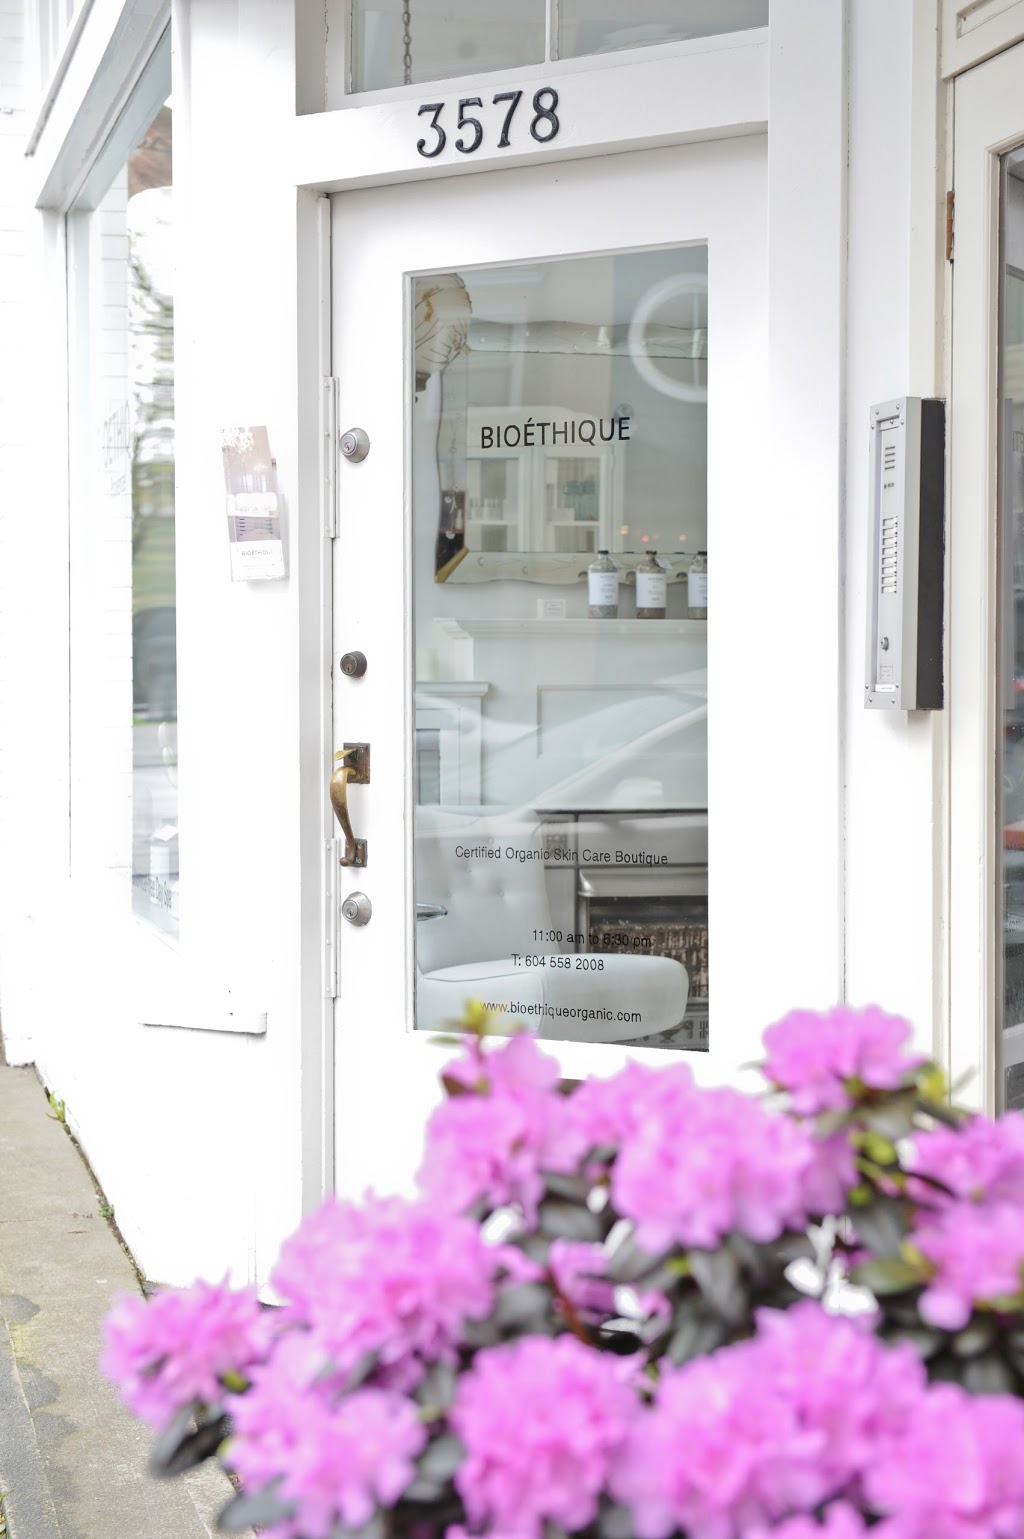 Bioéthique Spa on 4th | 3578 W 4th Ave, Vancouver, BC V6R 1N8, Canada | Phone: (604) 558-2008